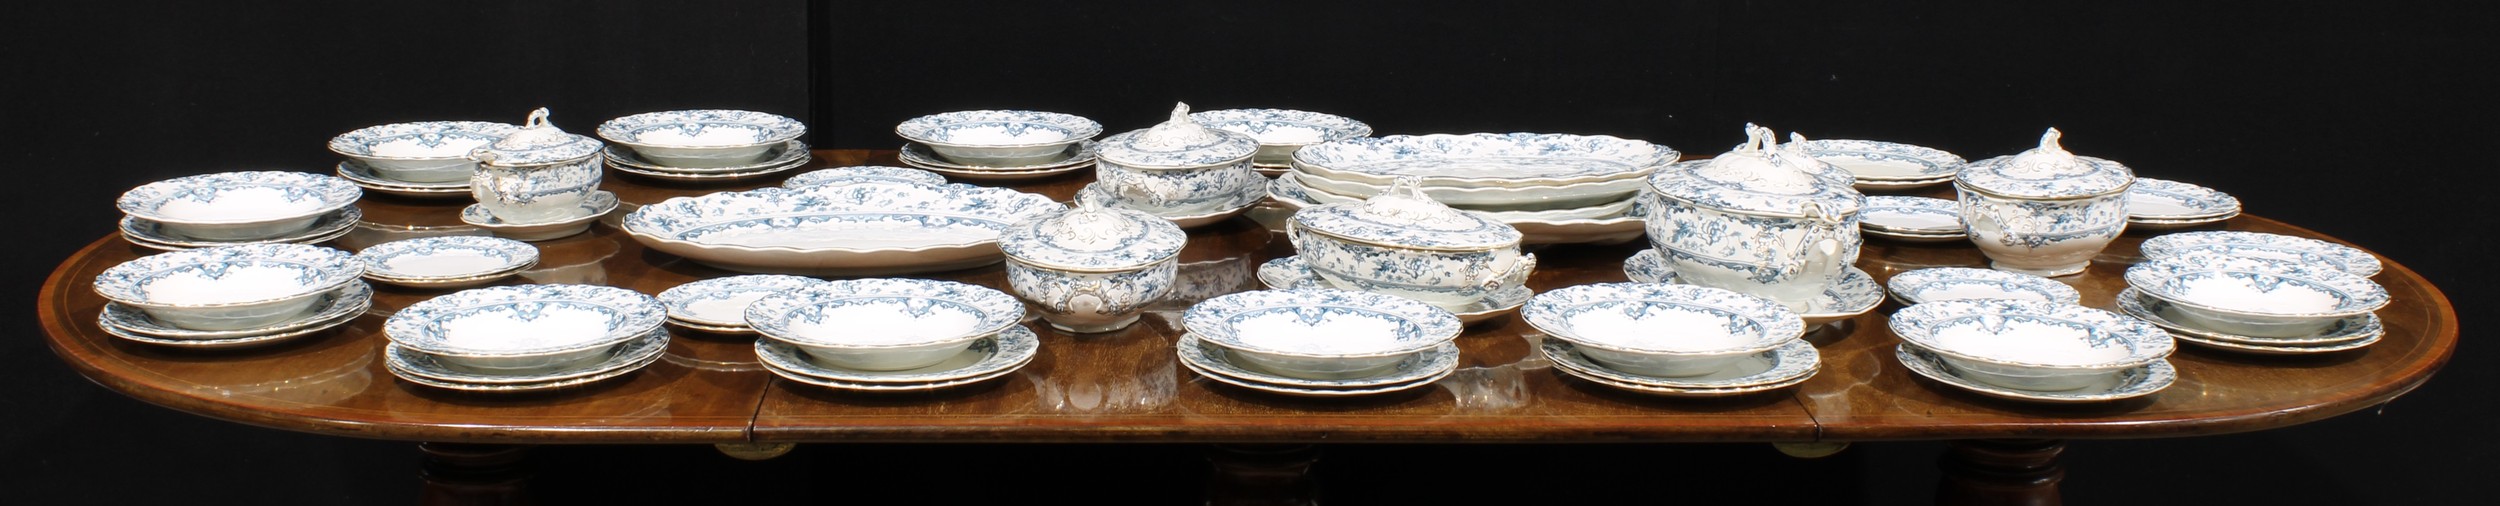 A 19th century Staffordshire Leighton Kew pattern dinner service, comprising soup tureen and